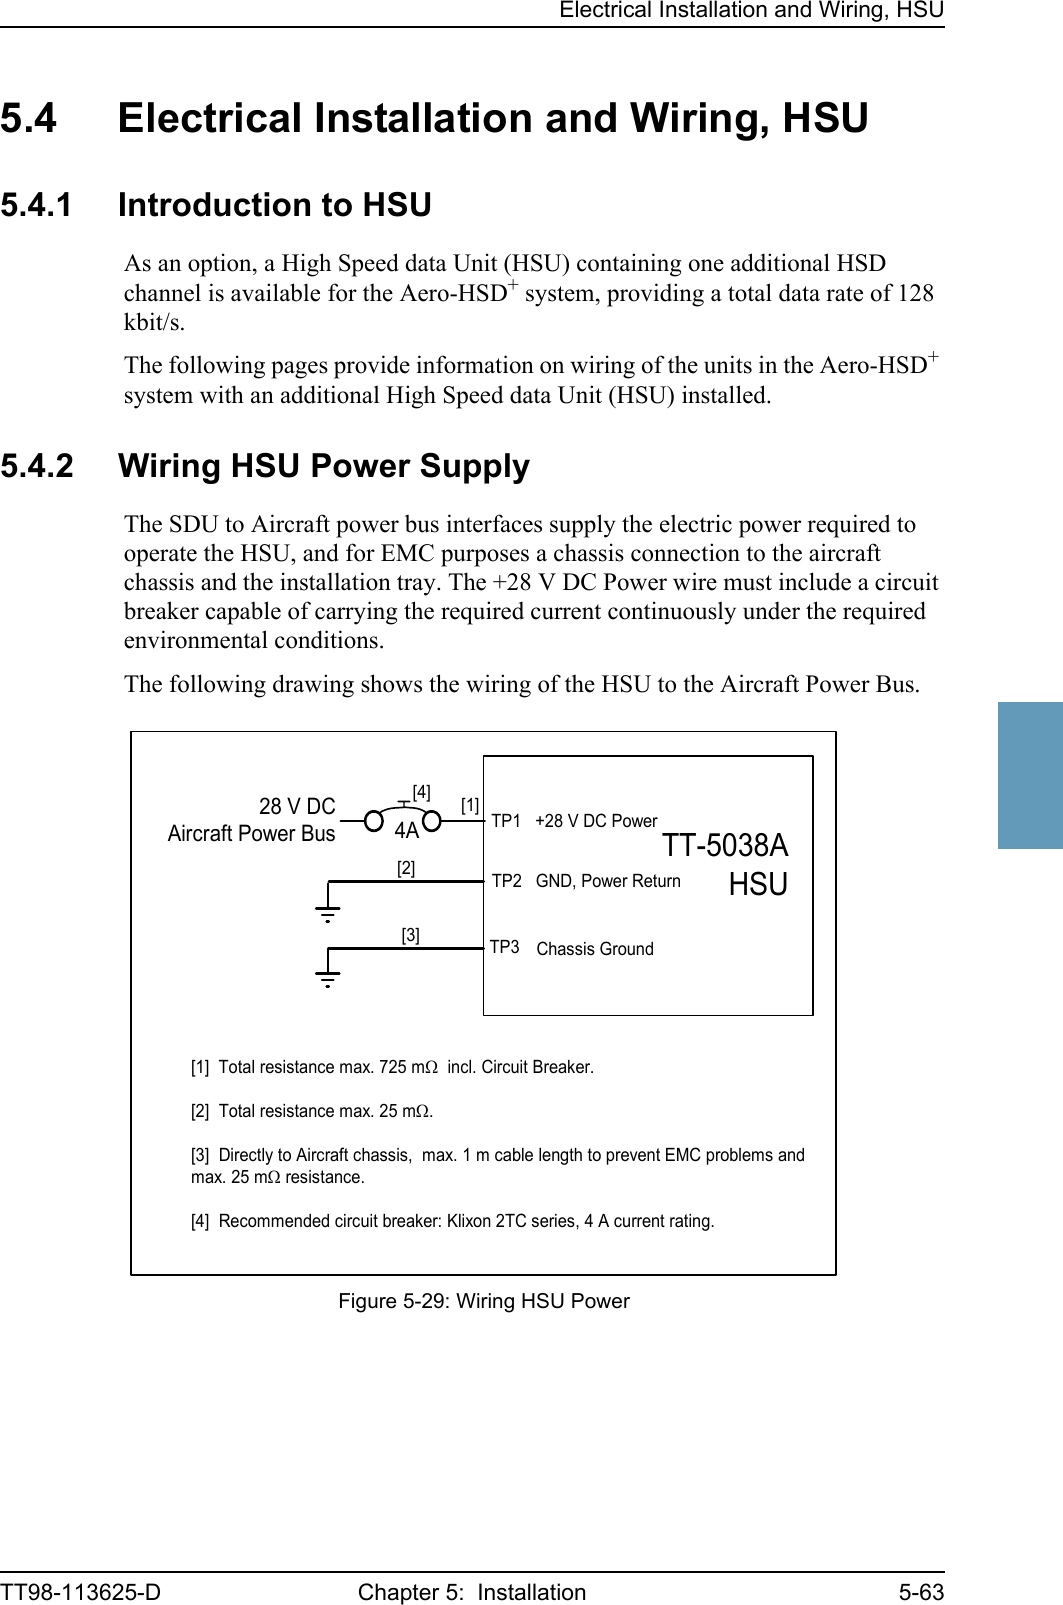 Electrical Installation and Wiring, HSUTT98-113625-D Chapter 5:  Installation 5-6355555.4 Electrical Installation and Wiring, HSU5.4.1 Introduction to HSUAs an option, a High Speed data Unit (HSU) containing one additional HSD channel is available for the Aero-HSD+ system, providing a total data rate of 128 kbit/s. The following pages provide information on wiring of the units in the Aero-HSD+ system with an additional High Speed data Unit (HSU) installed. 5.4.2 Wiring HSU Power SupplyThe SDU to Aircraft power bus interfaces supply the electric power required to operate the HSU, and for EMC purposes a chassis connection to the aircraft chassis and the installation tray. The +28 V DC Power wire must include a circuit breaker capable of carrying the required current continuously under the required environmental conditions.The following drawing shows the wiring of the HSU to the Aircraft Power Bus.Figure 5-29: Wiring HSU PowerTT-5038AHSU[2] TP2   GND, Power Return28 V DCAircraft Power Bus[1]  Total resistance max. 725 mΩ  incl. Circuit Breaker.[2]  Total resistance max. 25 mΩ.[3]  Directly to Aircraft chassis,  max. 1 m cable length to prevent EMC problems andmax. 25 mΩ resistance.[4]  Recommended circuit breaker: Klixon 2TC series, 4 A current rating.TP3TP1   +28 V DC PowerChassis Ground[4]4A[1][3]